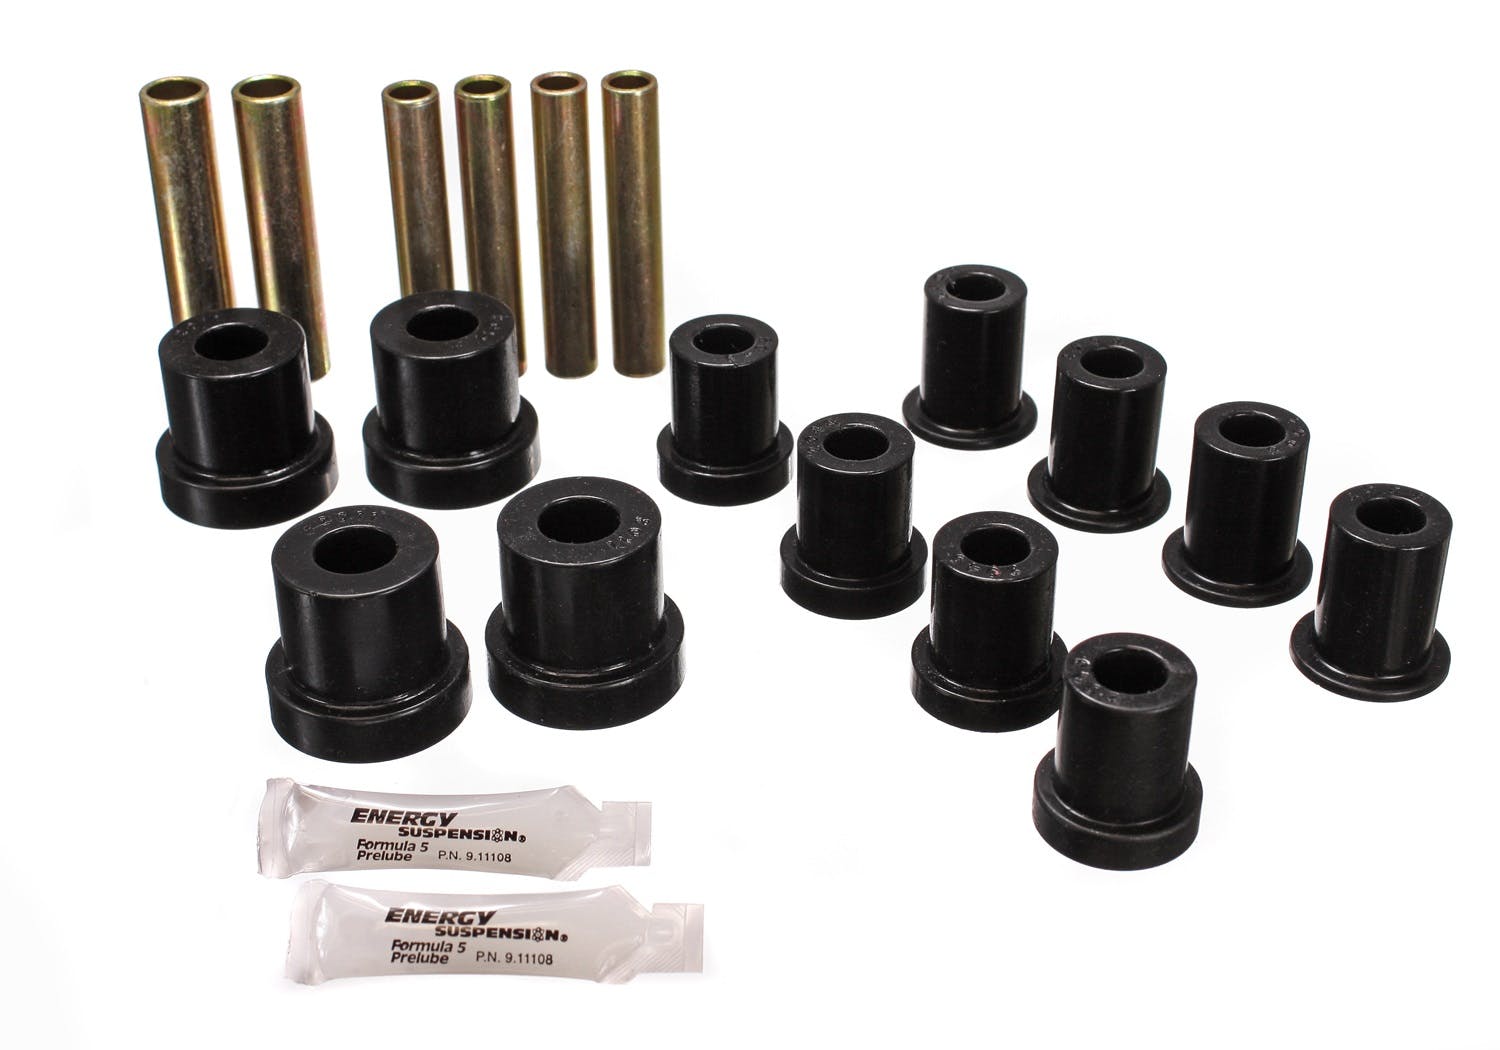 Energy Suspension 3.2112G Front Spring Bushings